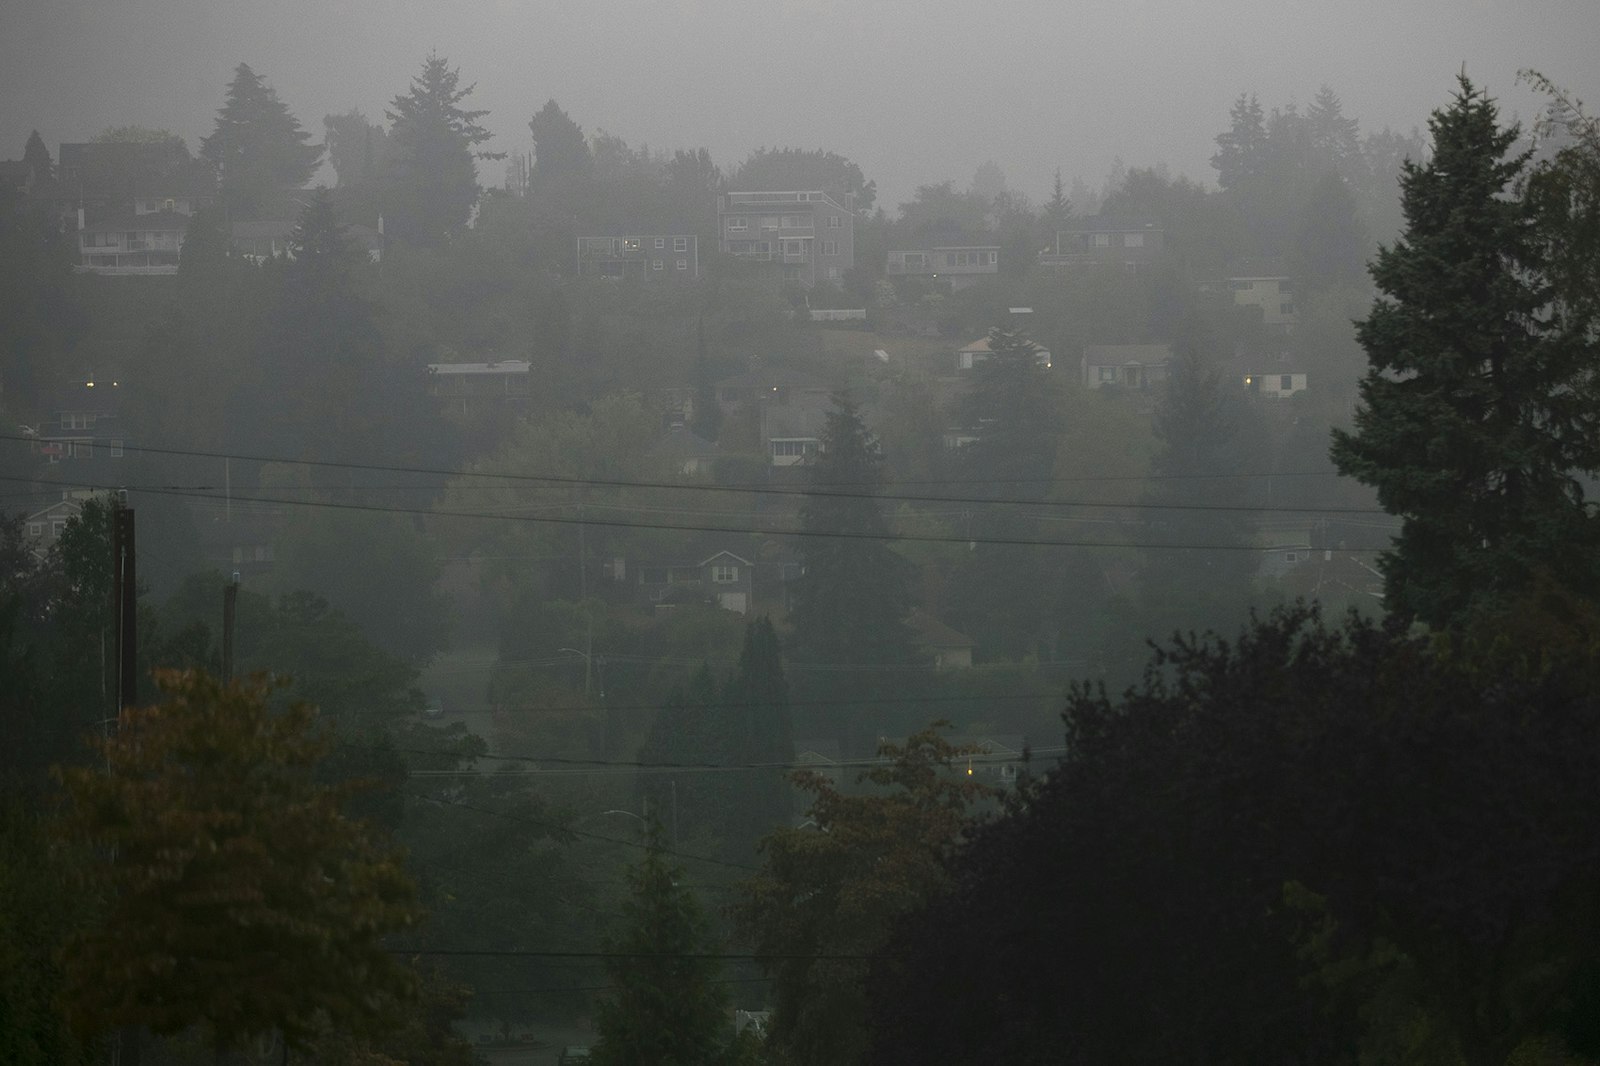 KUOW The smoke is here. Hazardous air quality in Seattle as wildfires